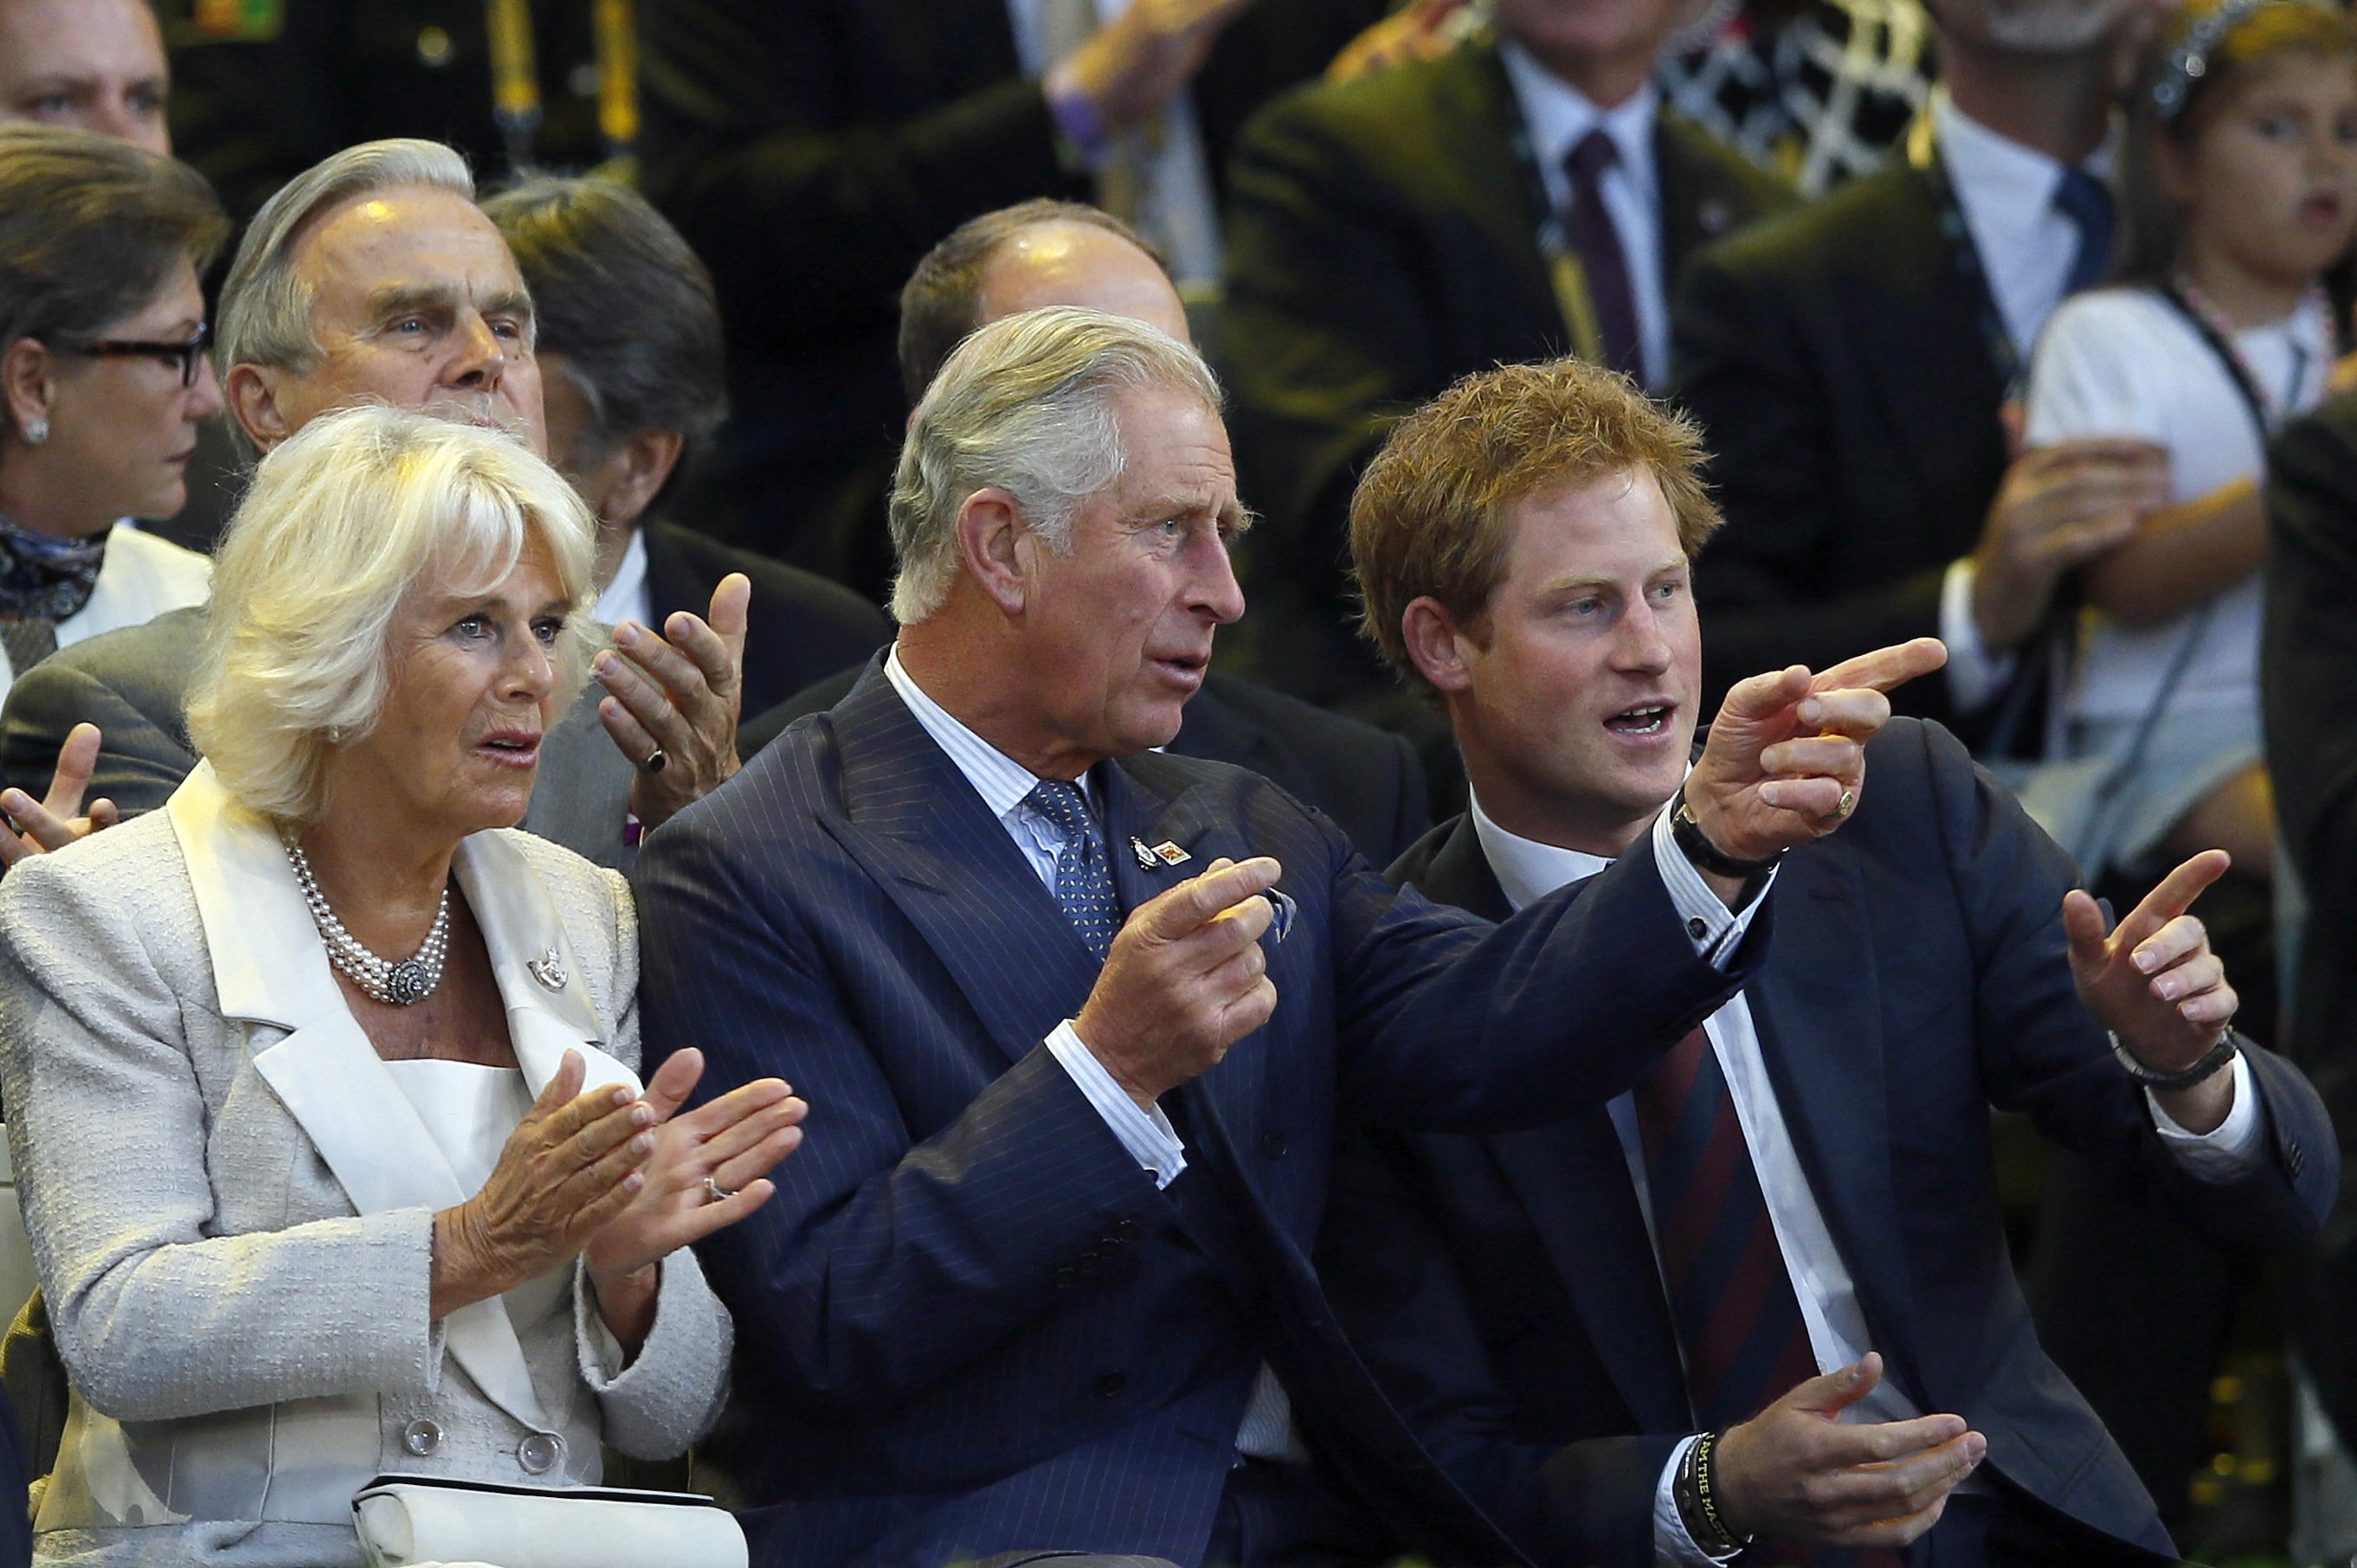 Prince Charles gestures as he sits next to his wife Camilla and his son Prince Harry during the opening ceremony of the Invictus Games at Queen Elizabeth II Park in London on September 10, 2014. | Source: Getty Images